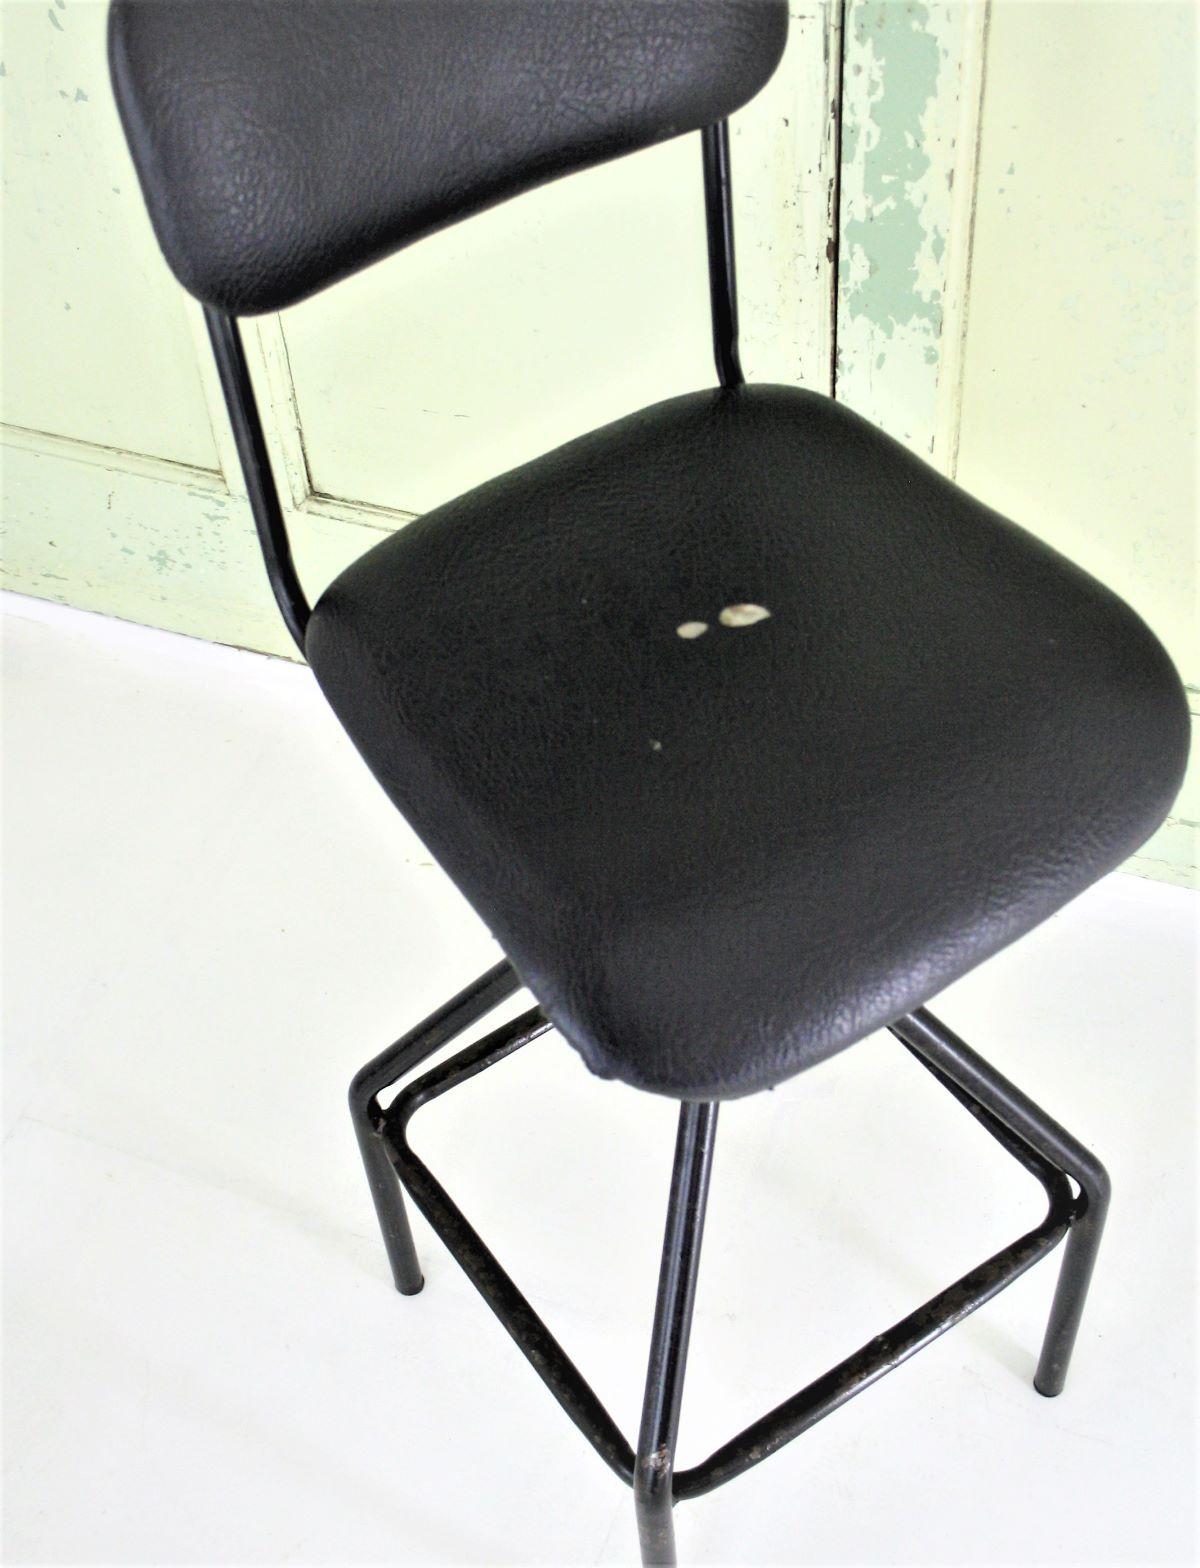 1970s Industrial Factory Swivel Stool with Backrest Sturdy Black metal frame 6